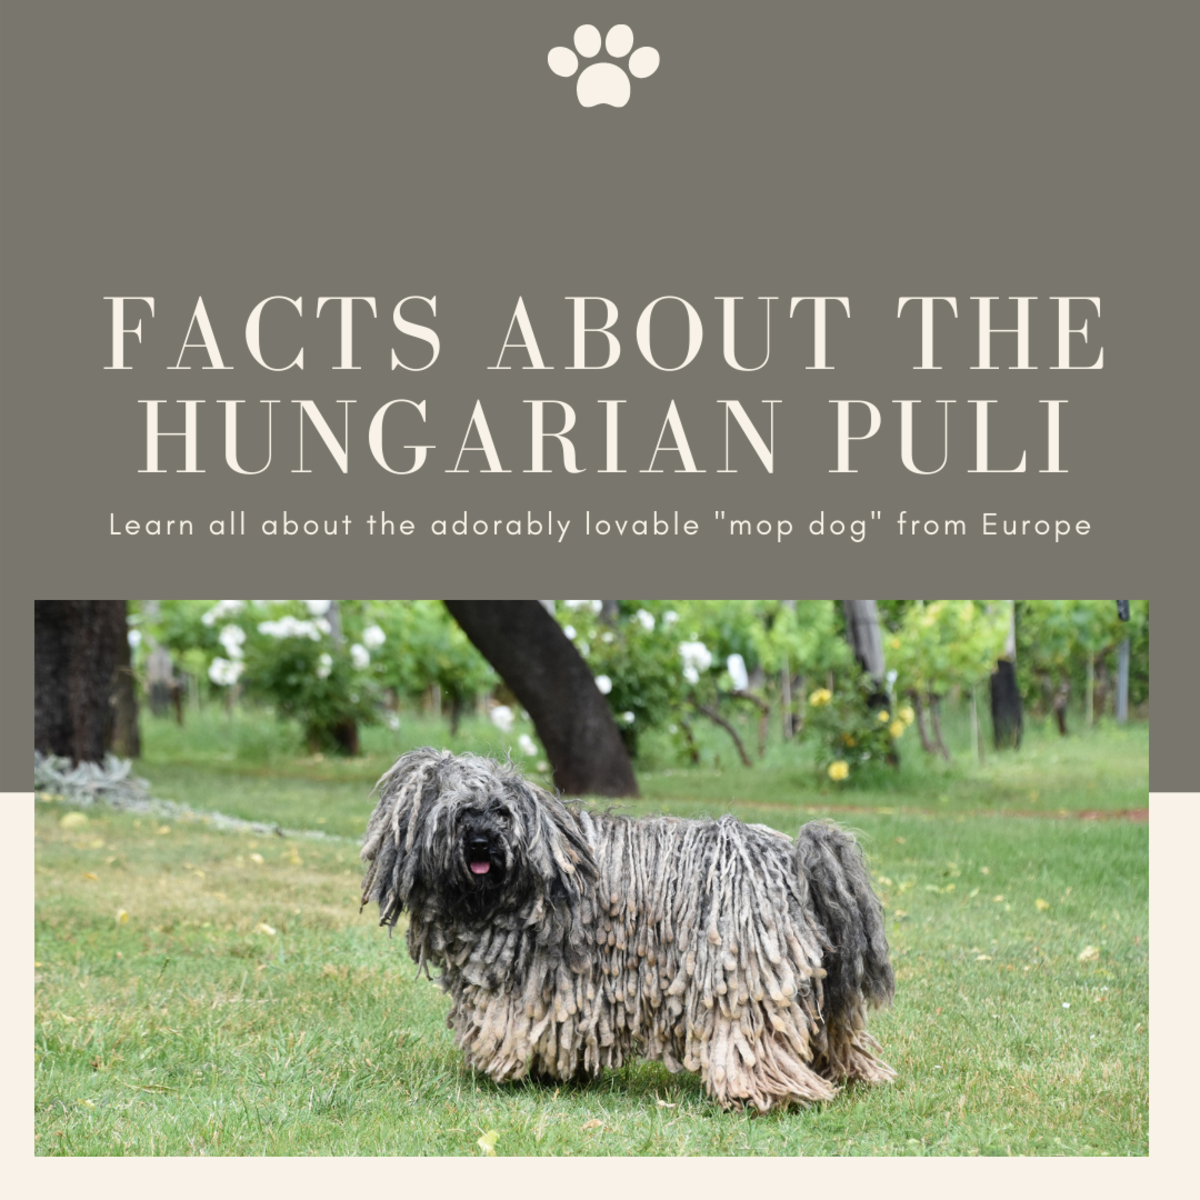 This article will provide you with all sorts of amazing information about the wonderful Hungarian Puli.